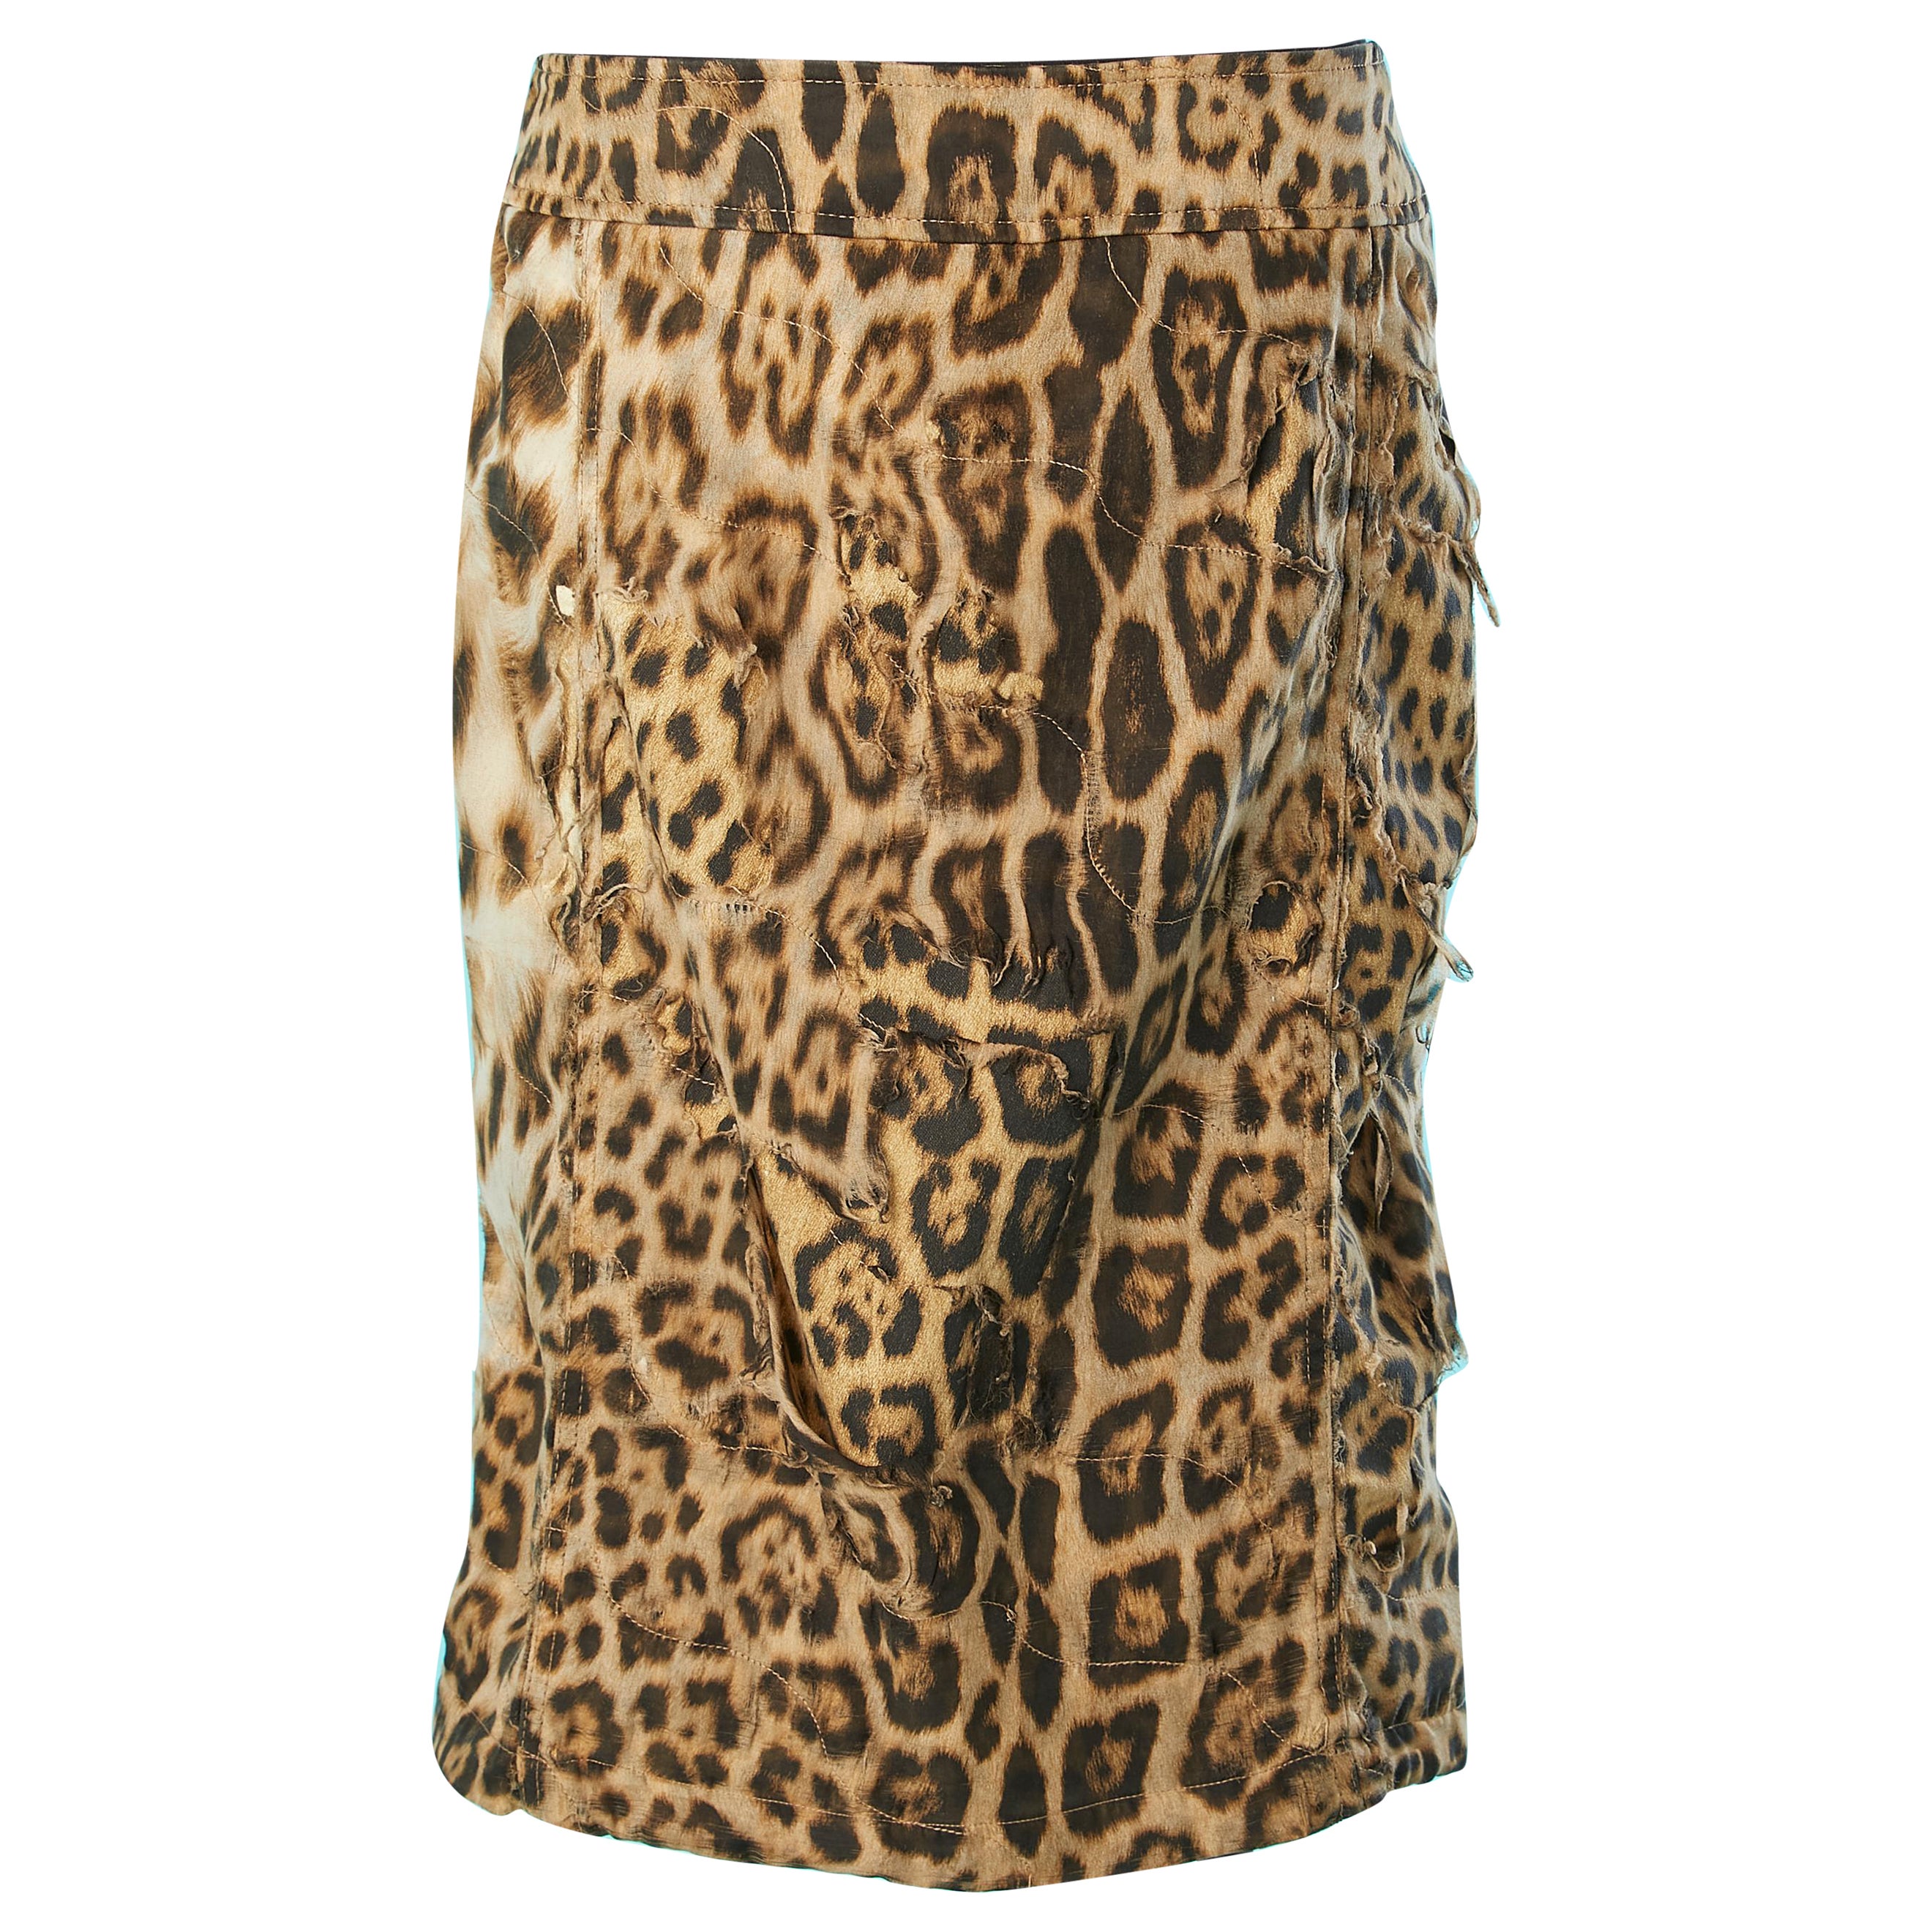 Leopard printed skirt with ripped- off silk chiffon over-lays Roberto Cavalli  For Sale